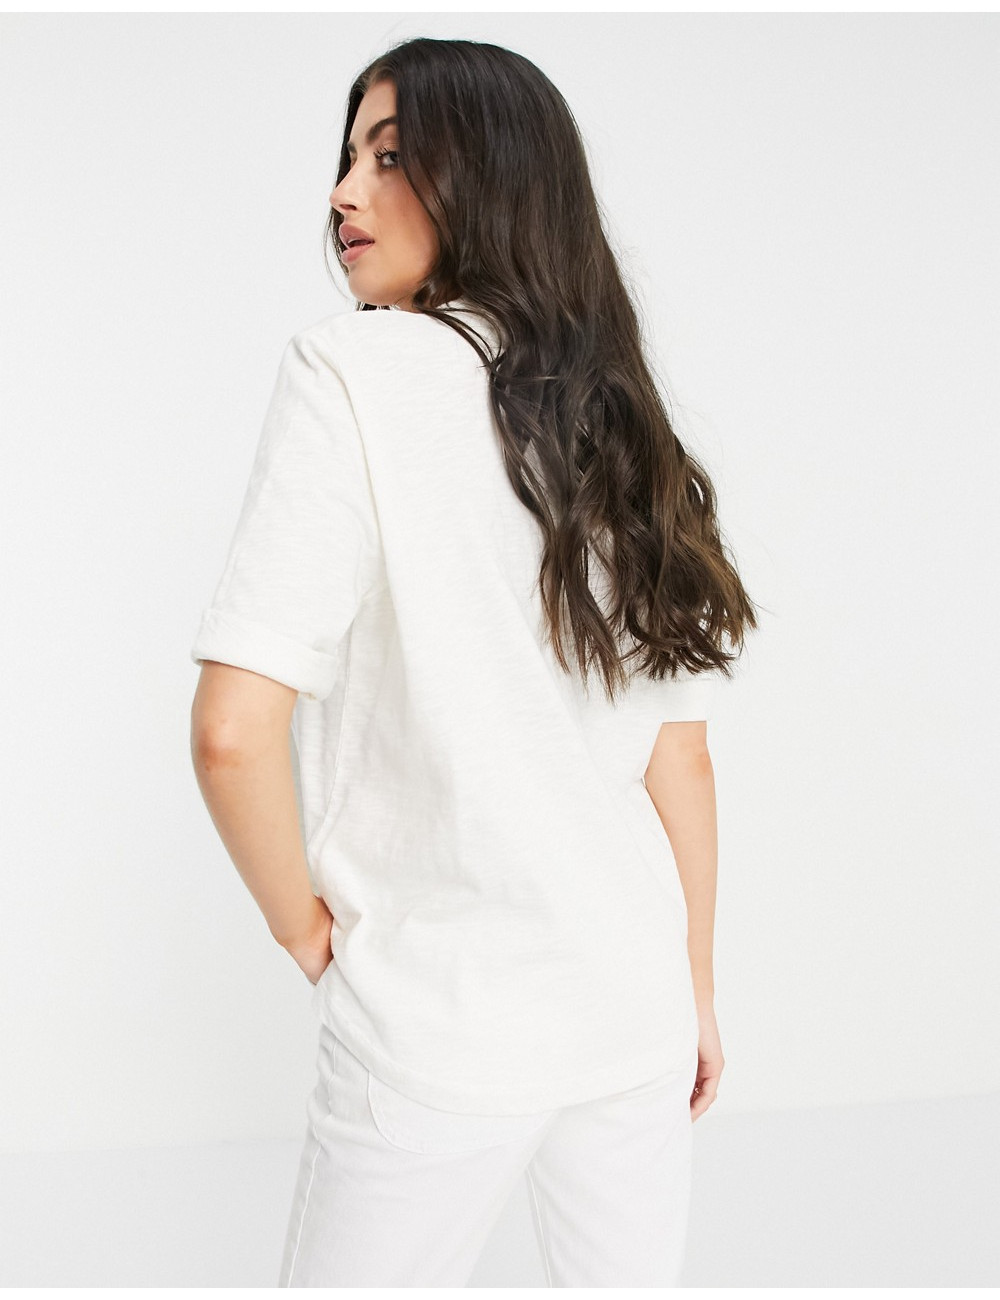 Whistles polo t shirt in ivory